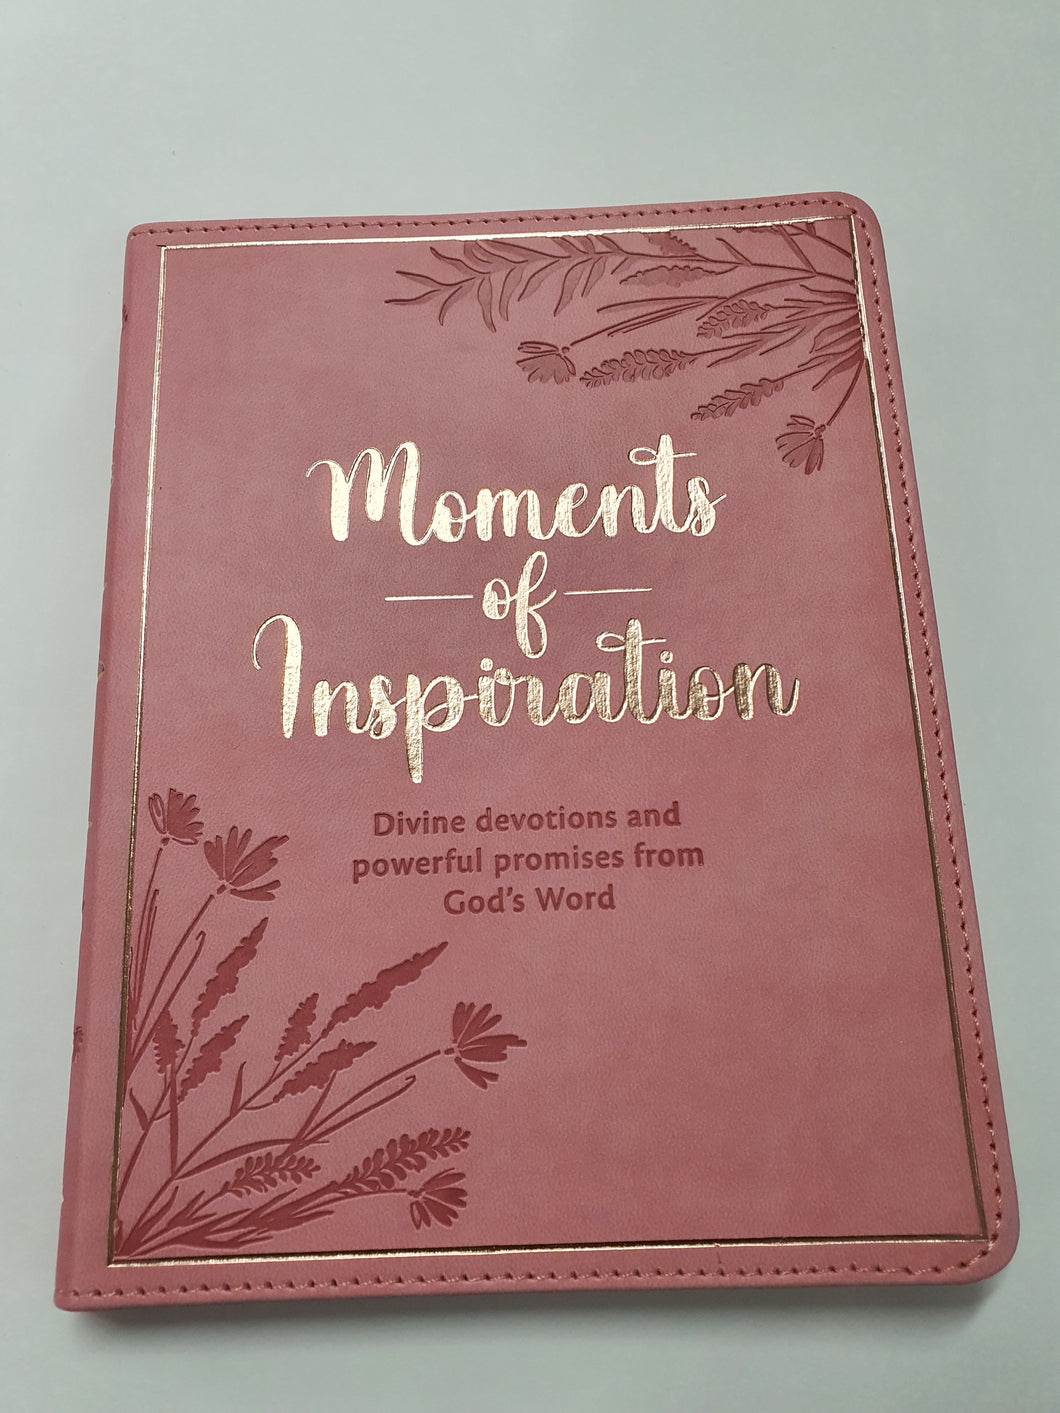 Moments of Inspiration